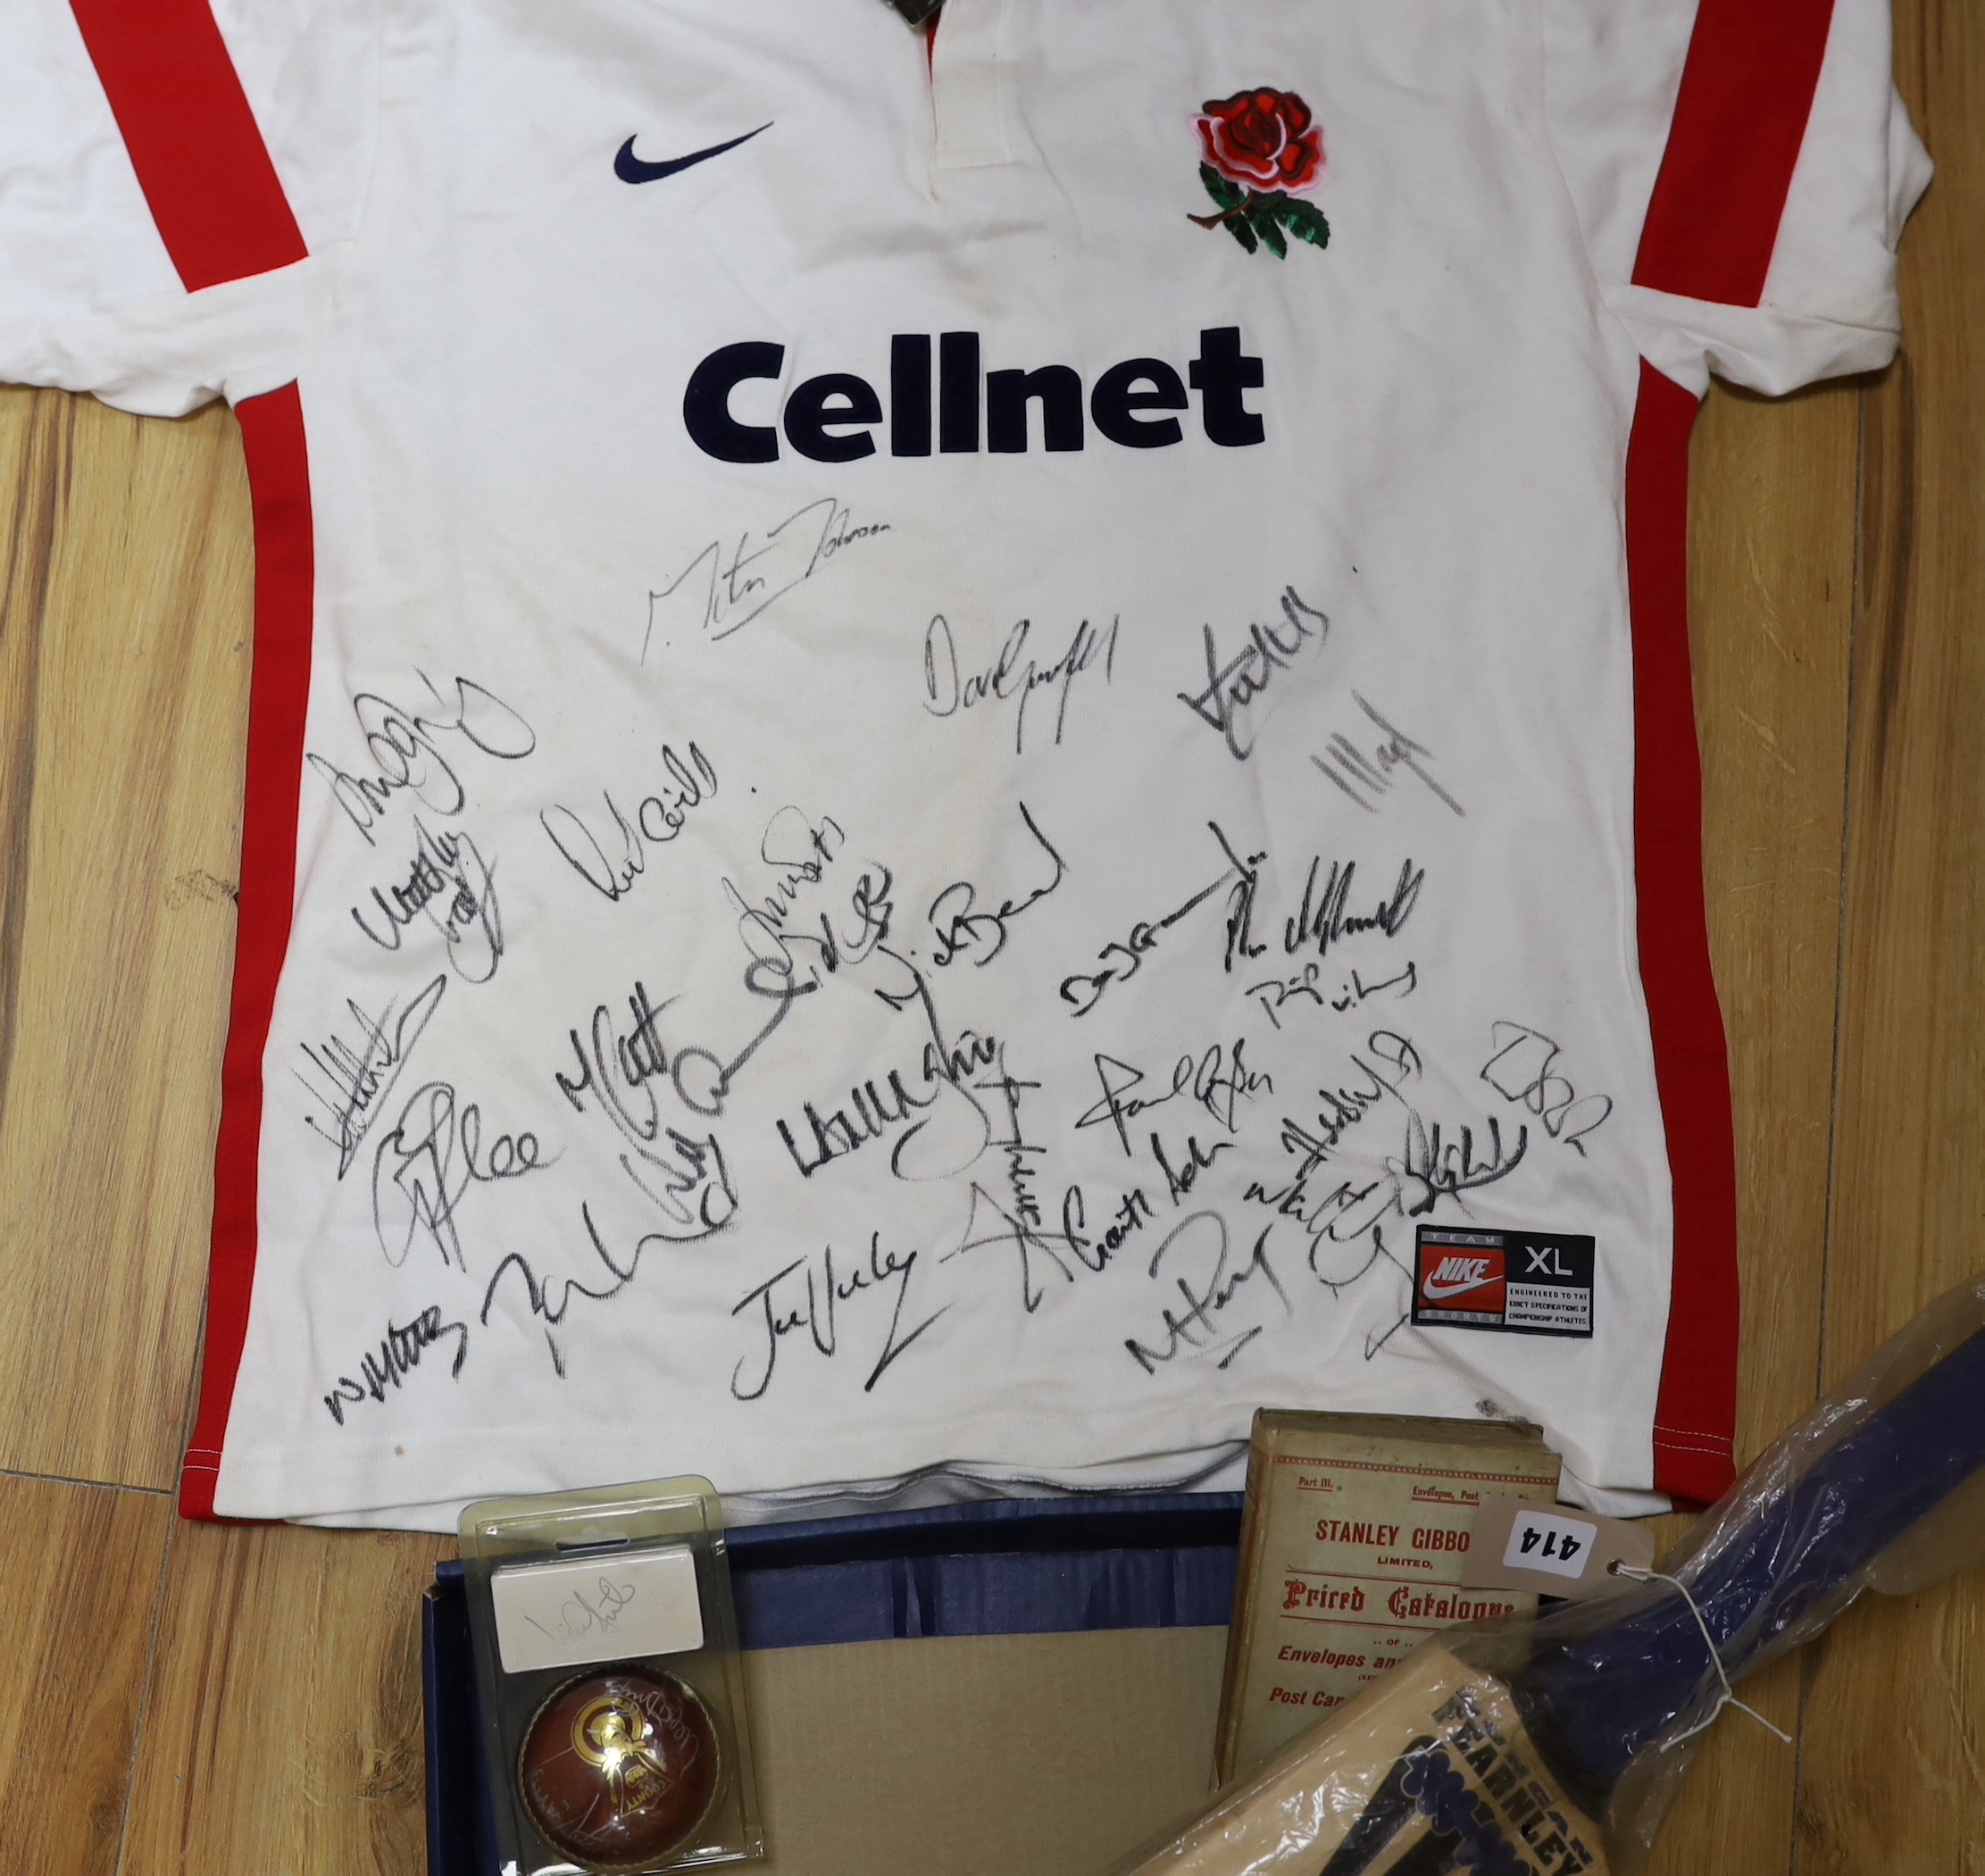 An autographed England rugby shirt, a similar England -v- South Africa 1998 Test Series cricket bat and a cricket ball